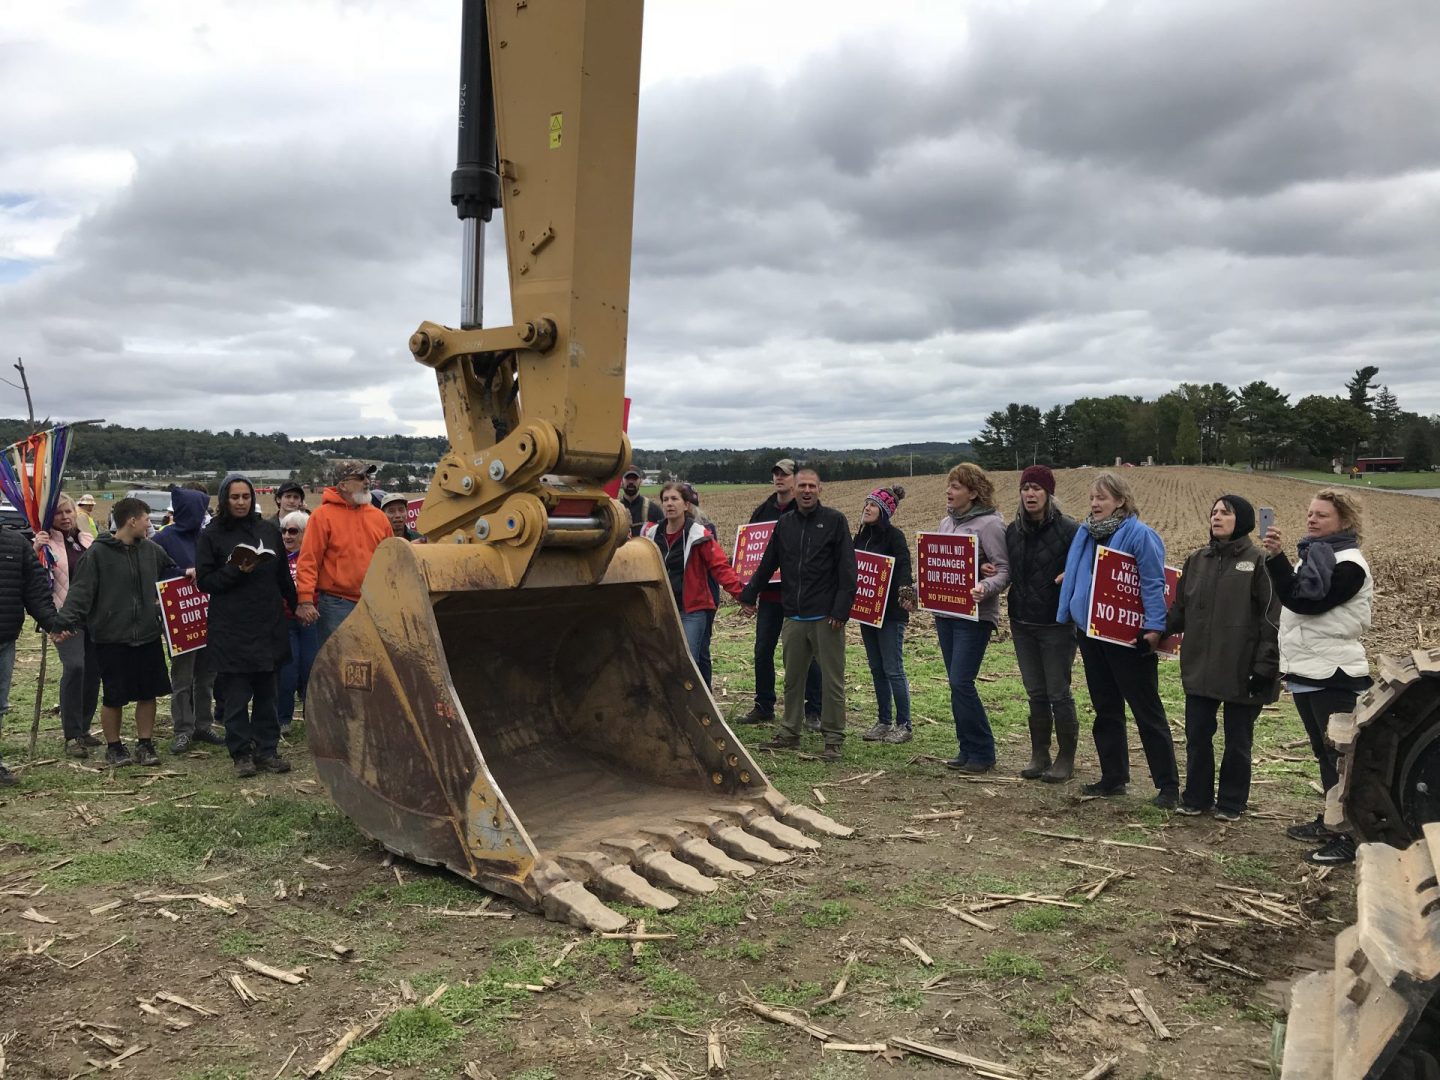 Protesters blocked pipeline construction equipment on the property of The Adorers of the Blood of Christ, an order of Catholic nuns, in Lancaster County last year.